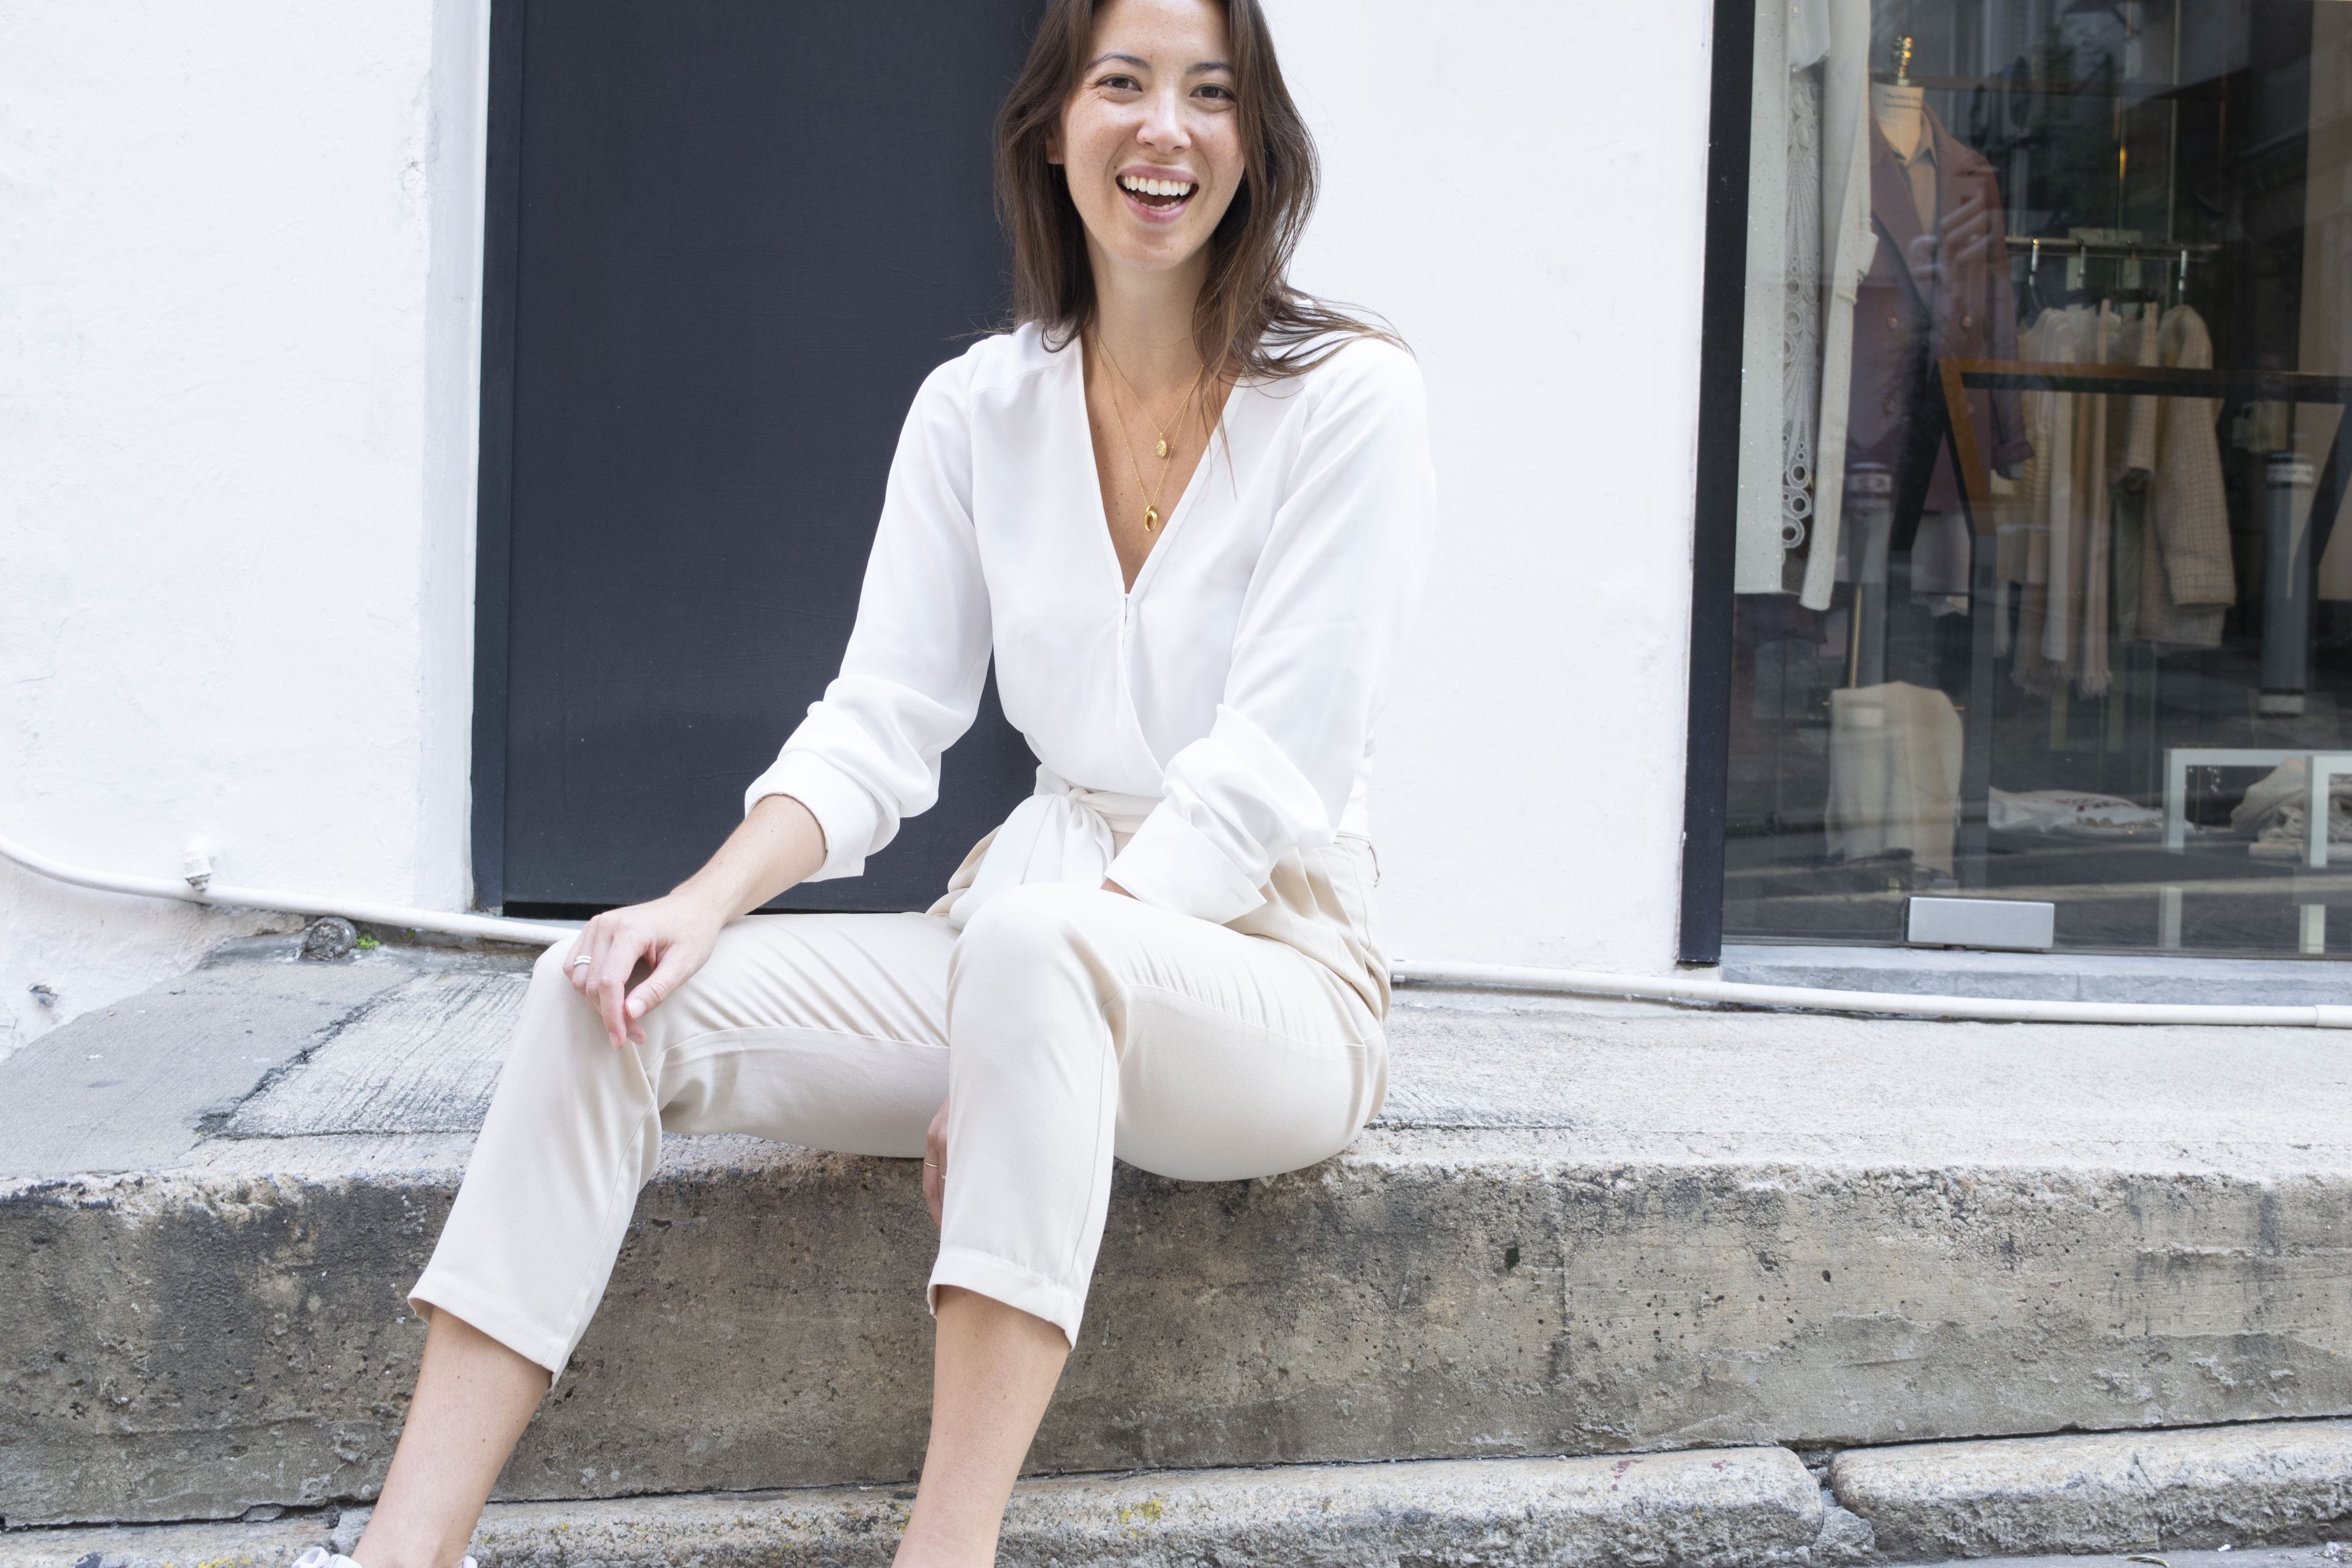 Rebecca Ling, a lawyer and founder of Hong Kong womenswear brand Parallel 51, talks about how reading The Joy of Small Things changed her life. Photo: Parallel 51